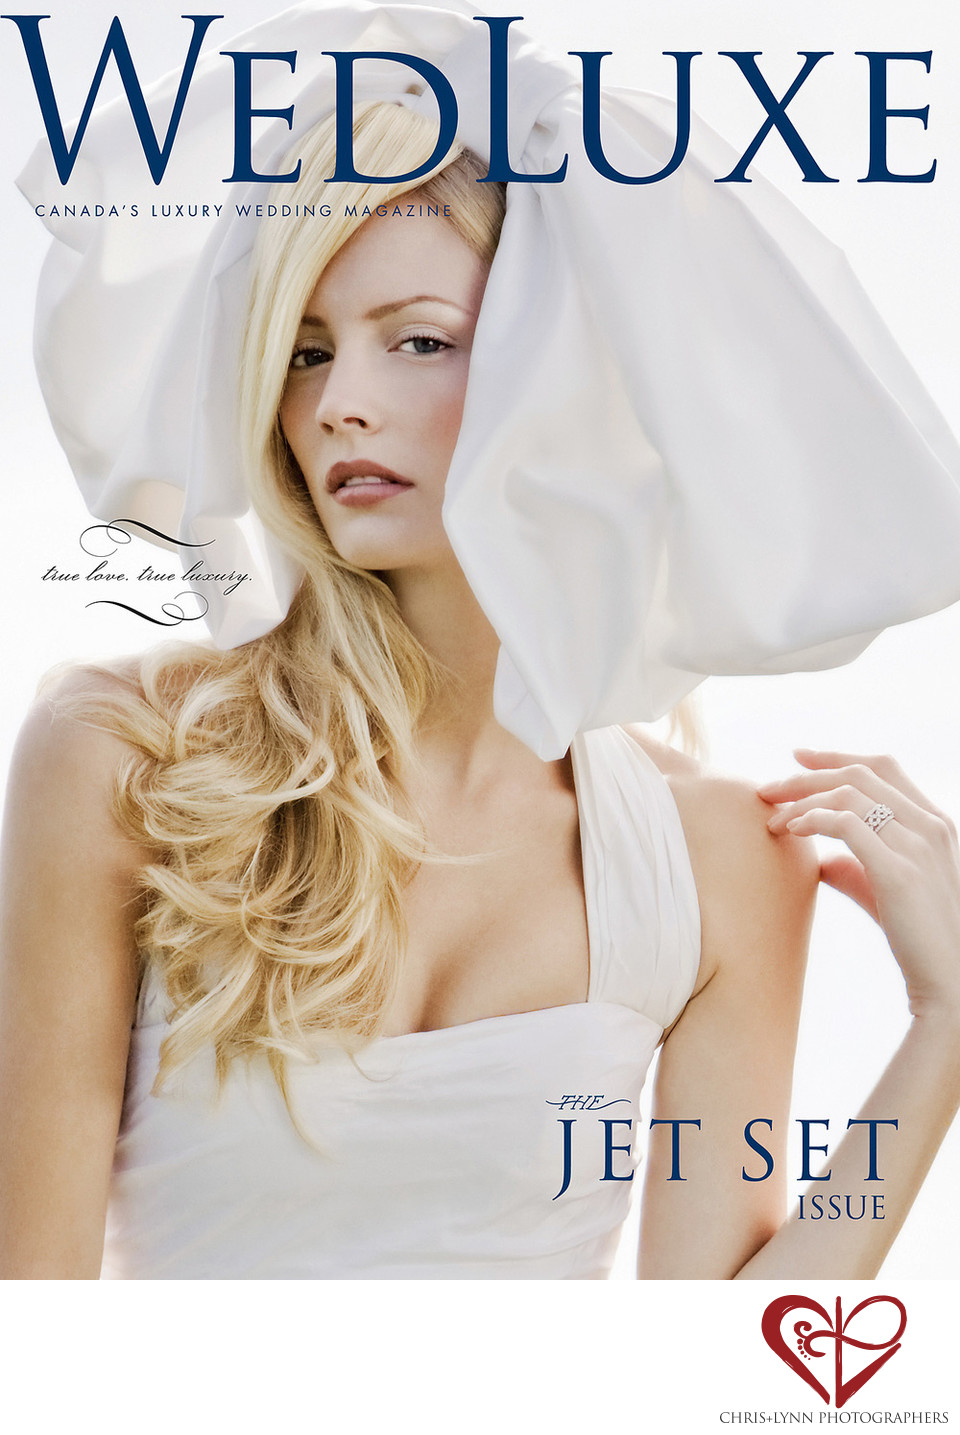 WEDLUXE - FRENCH CHATEAU WEDDING COVER